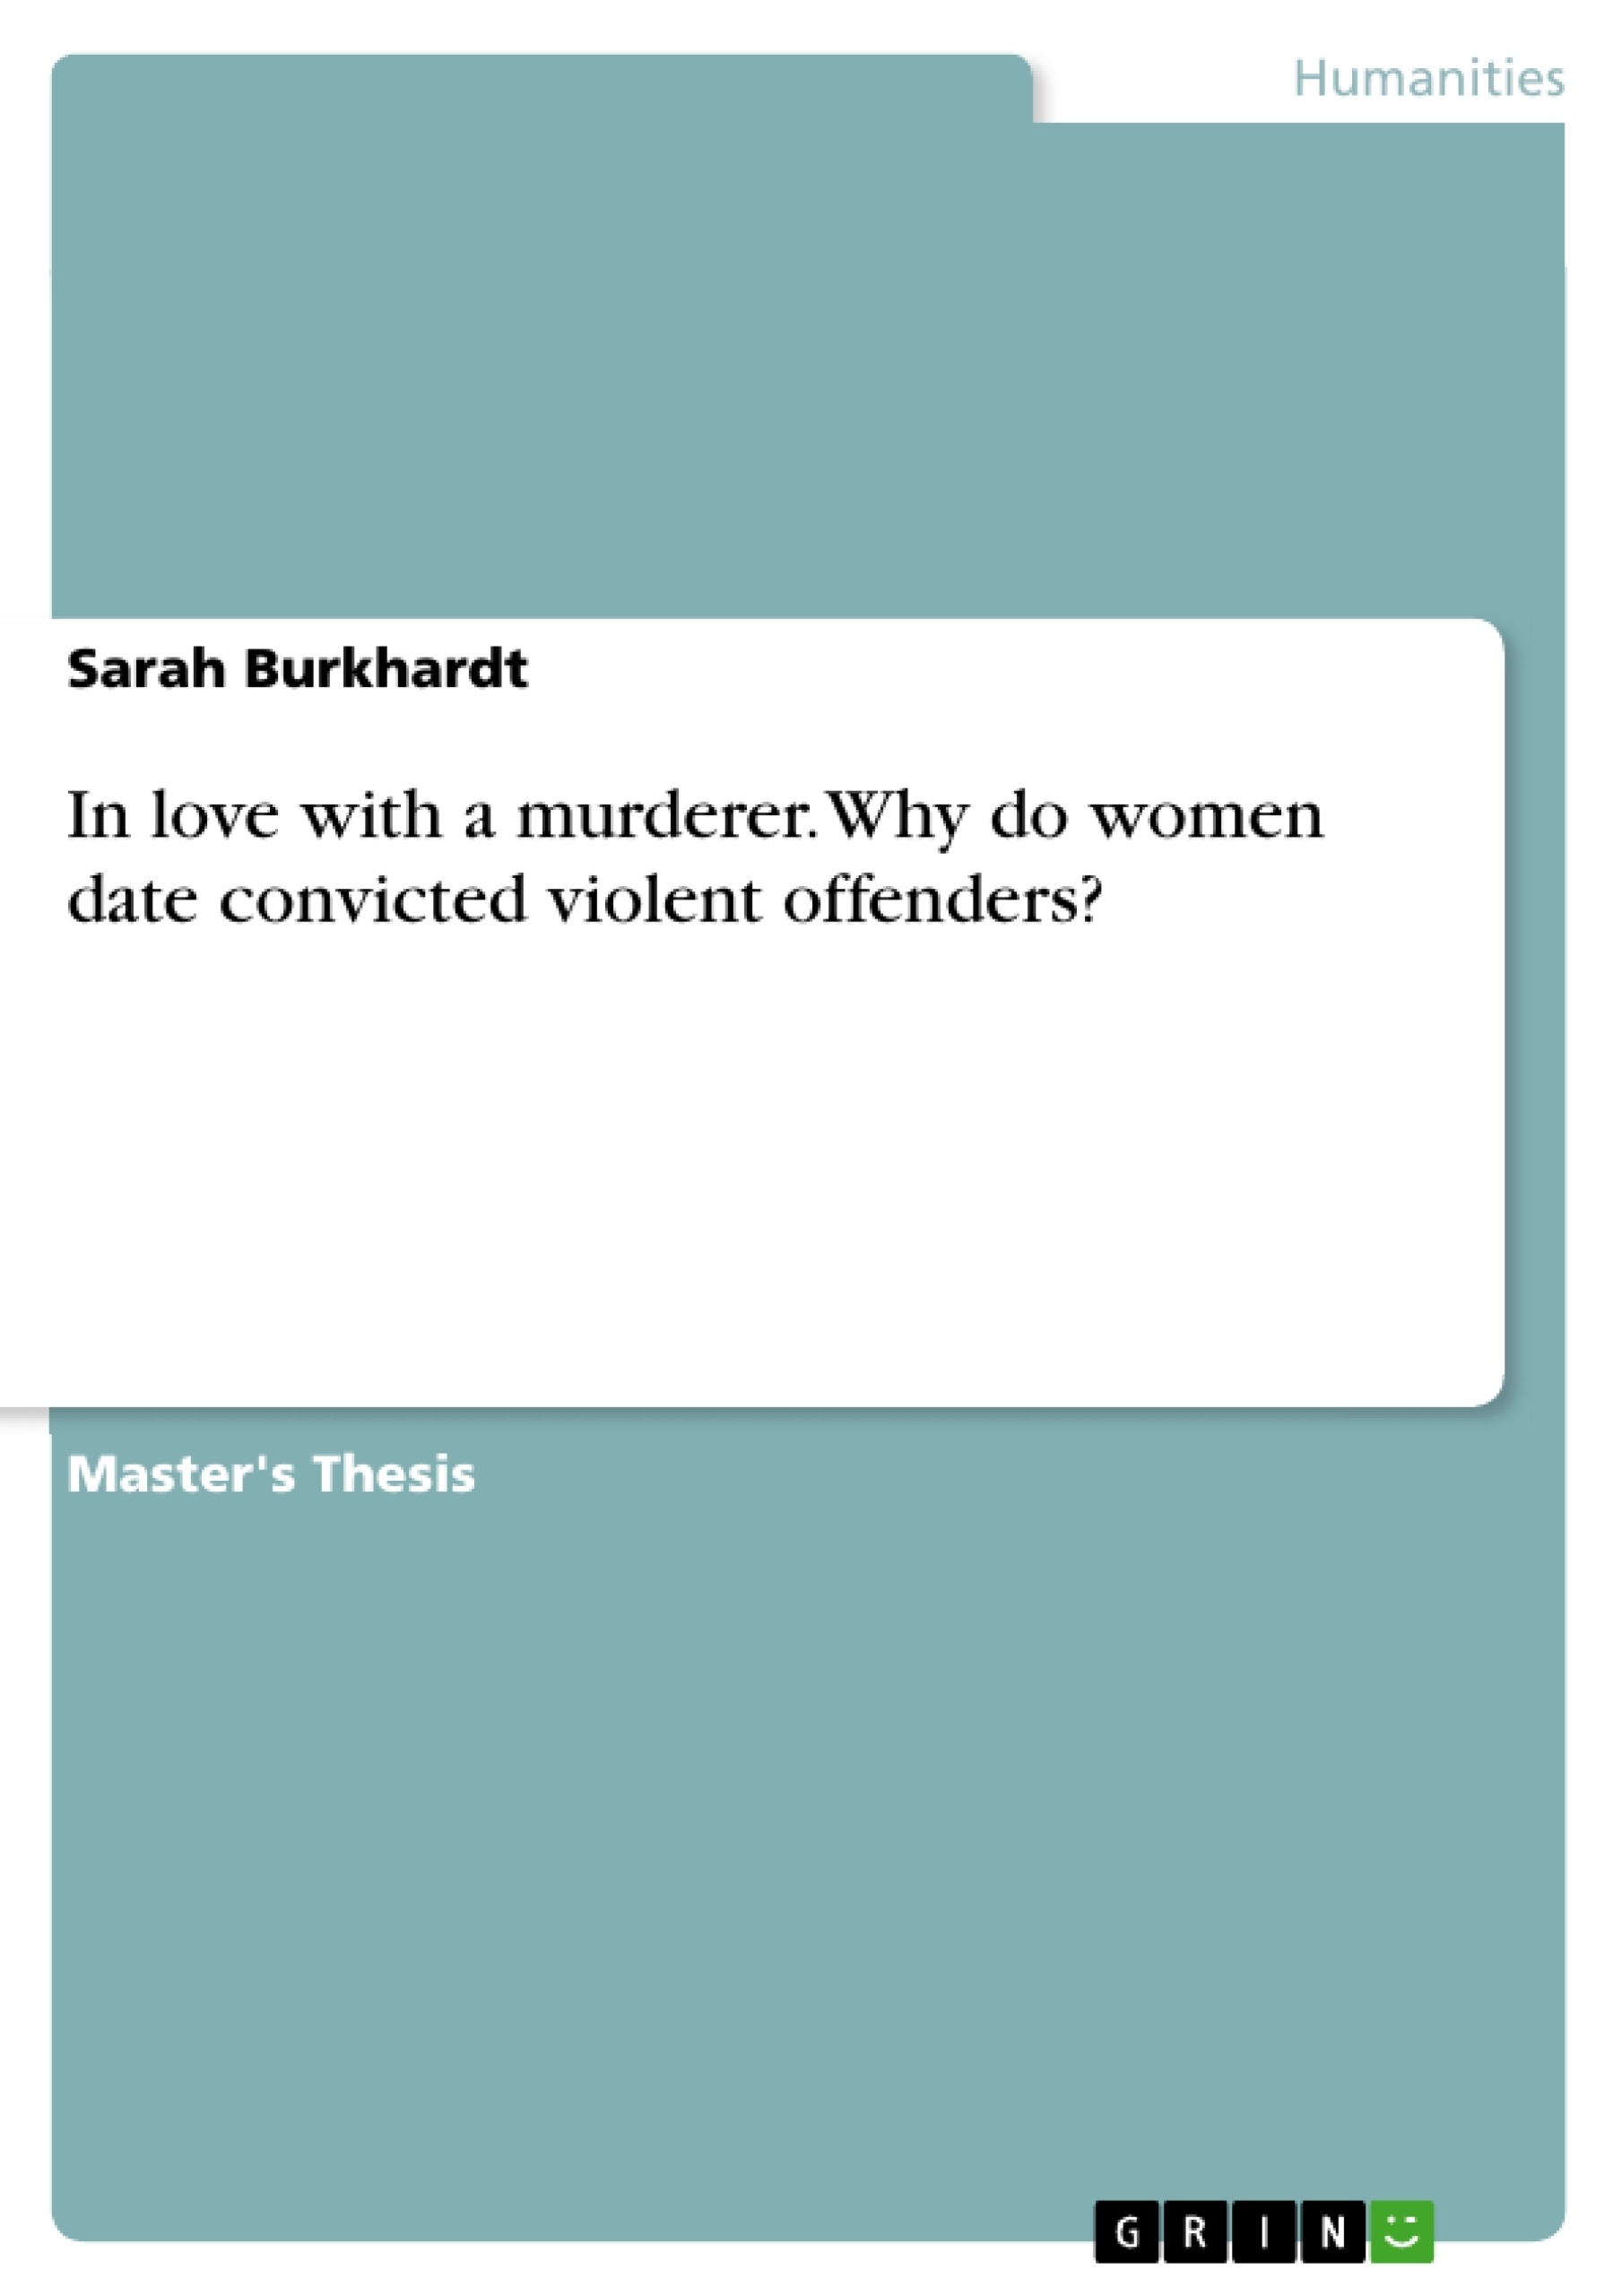 Titre: In love with a murderer. Why do women date convicted violent offenders?